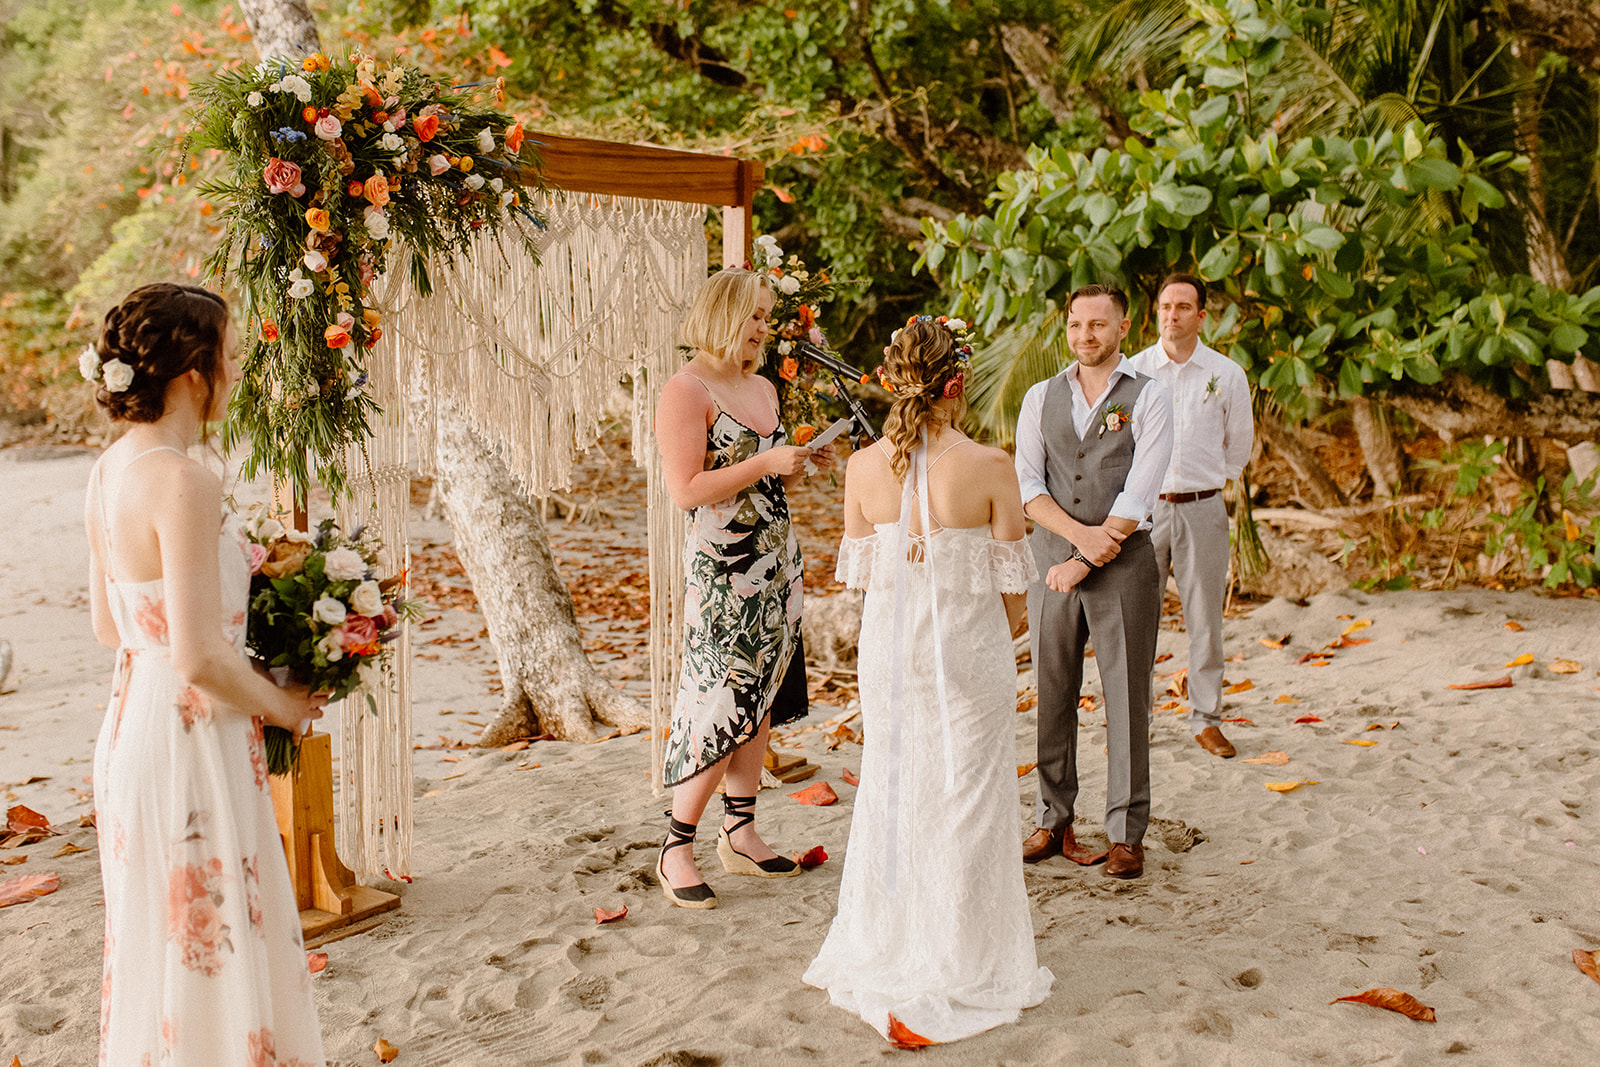 Bride and groom standing during wedding ceremony on the beach